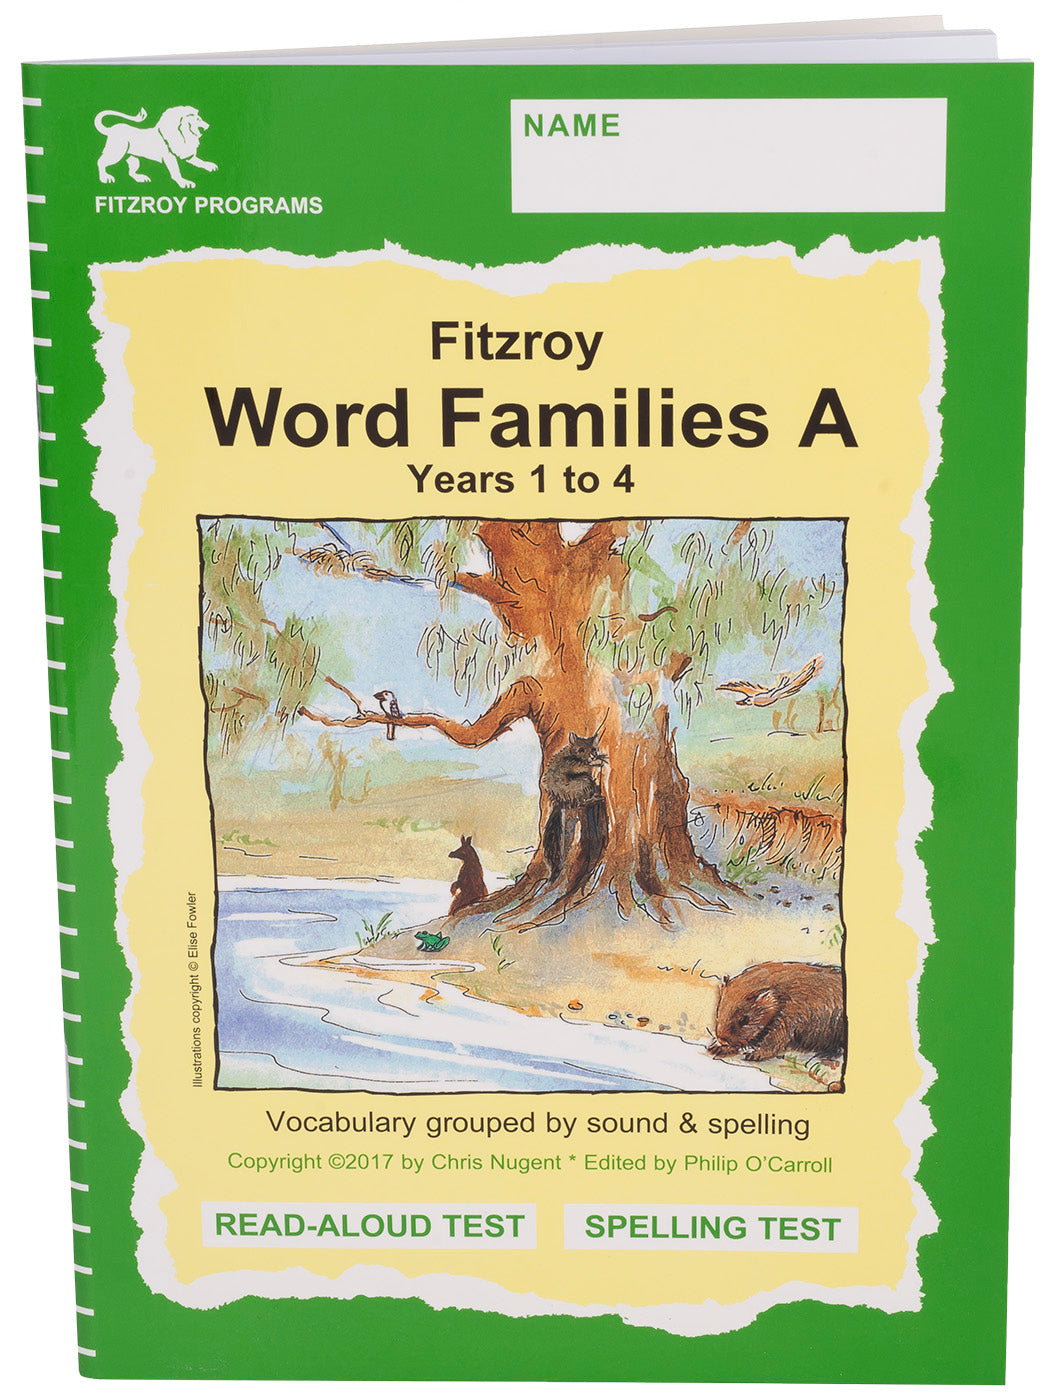 Fitzroy Word Families A